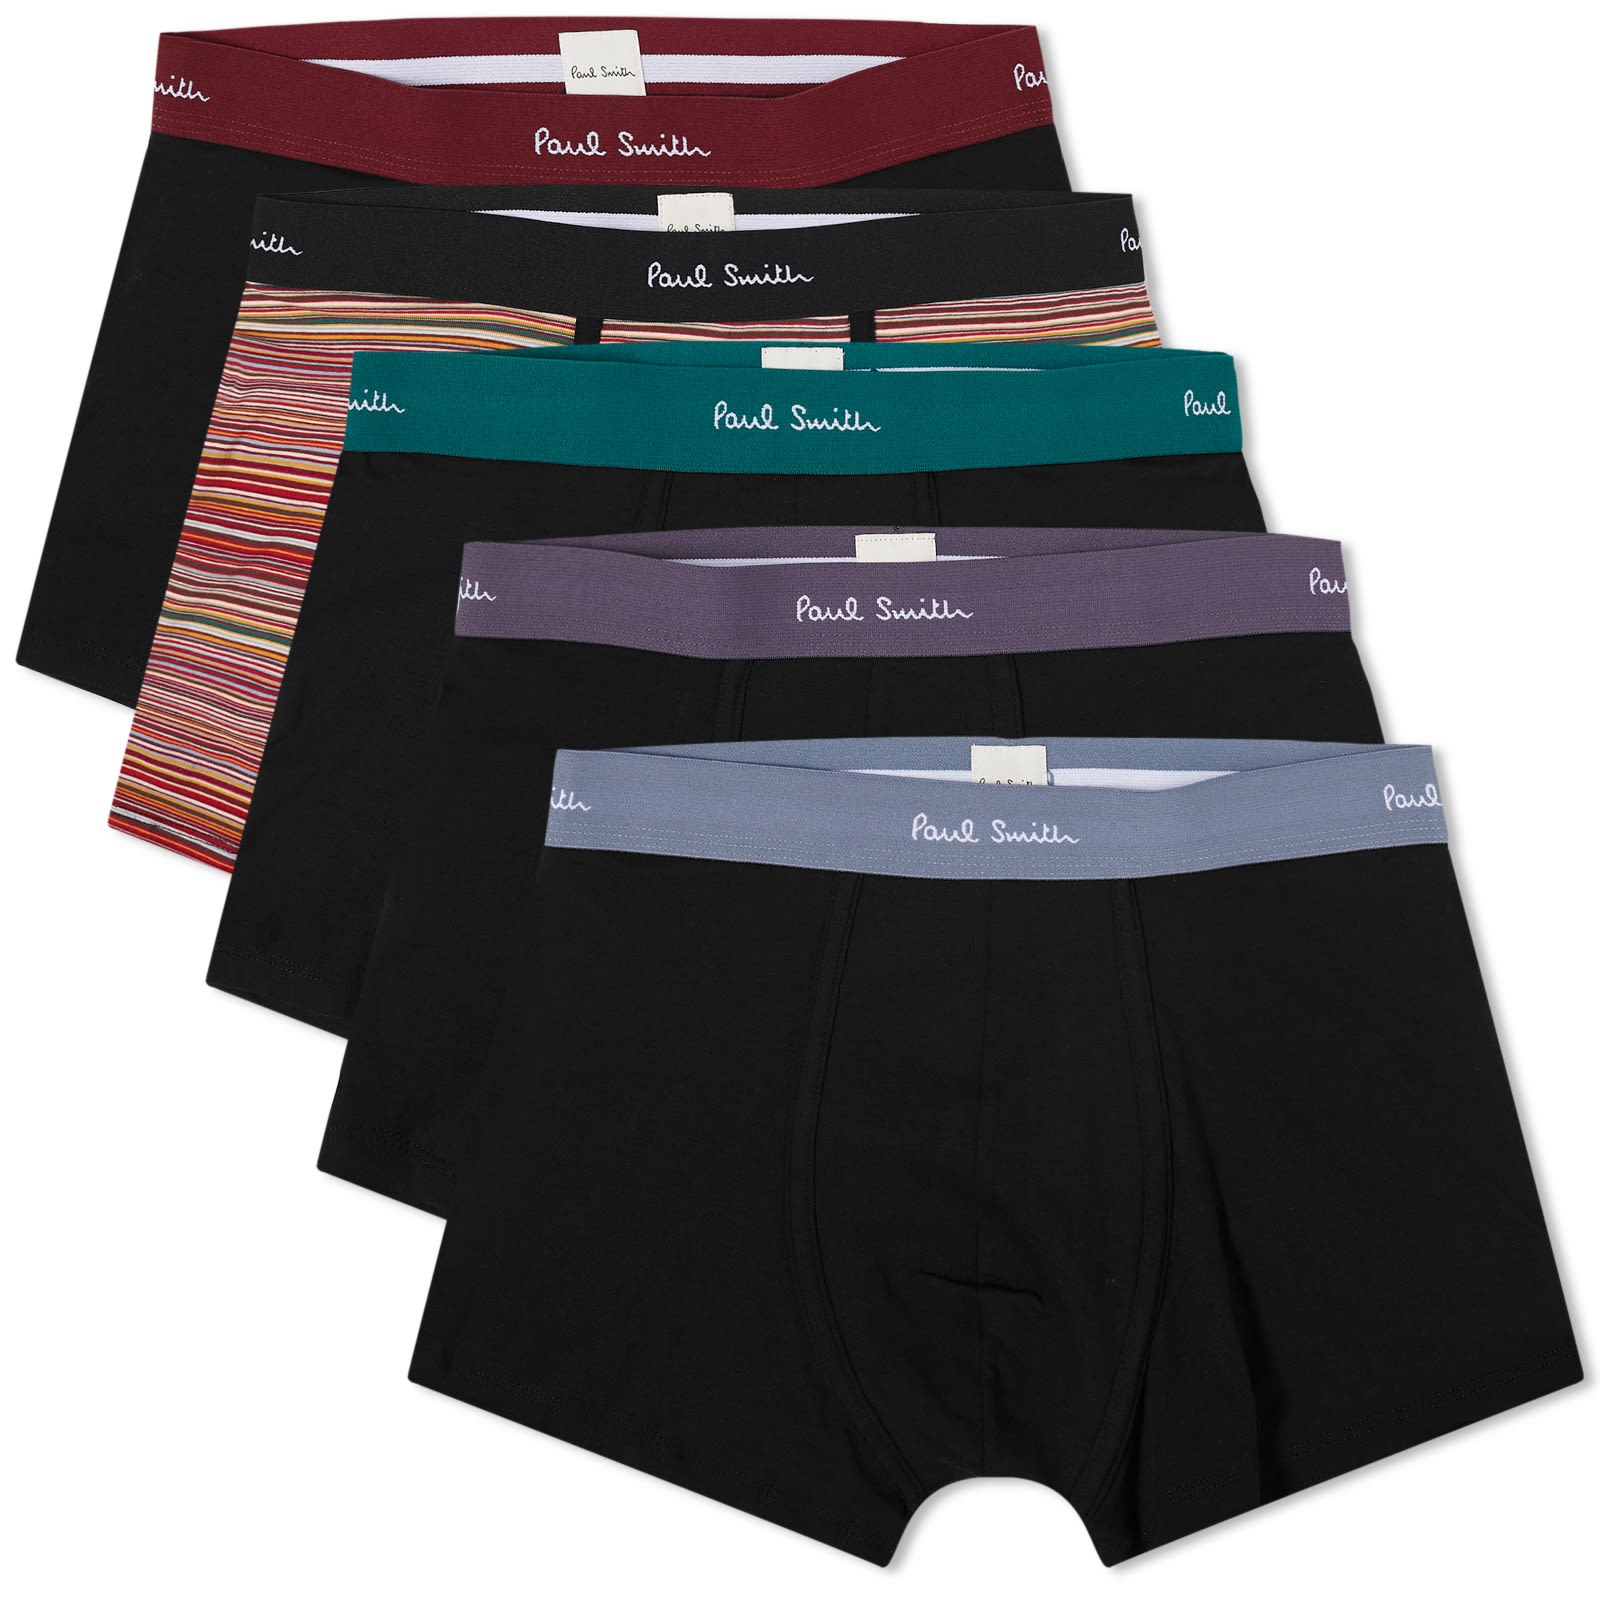 Paul Smith Trunk - 5 Pack - 1